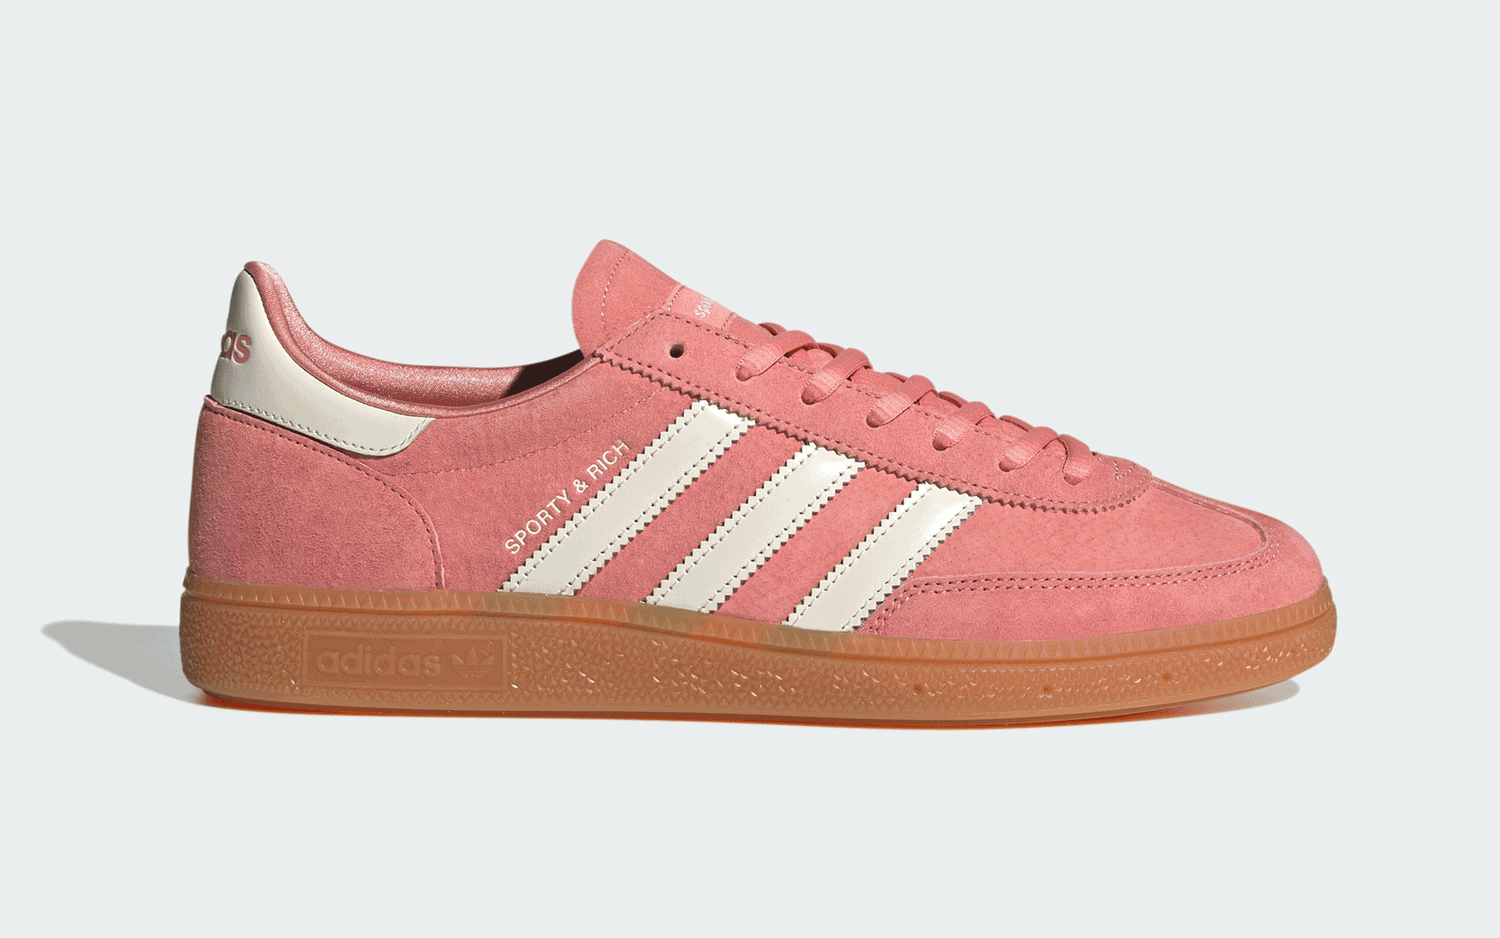 The Sporty & Rich x Adidas Handball Spezial Collection Releases May 23